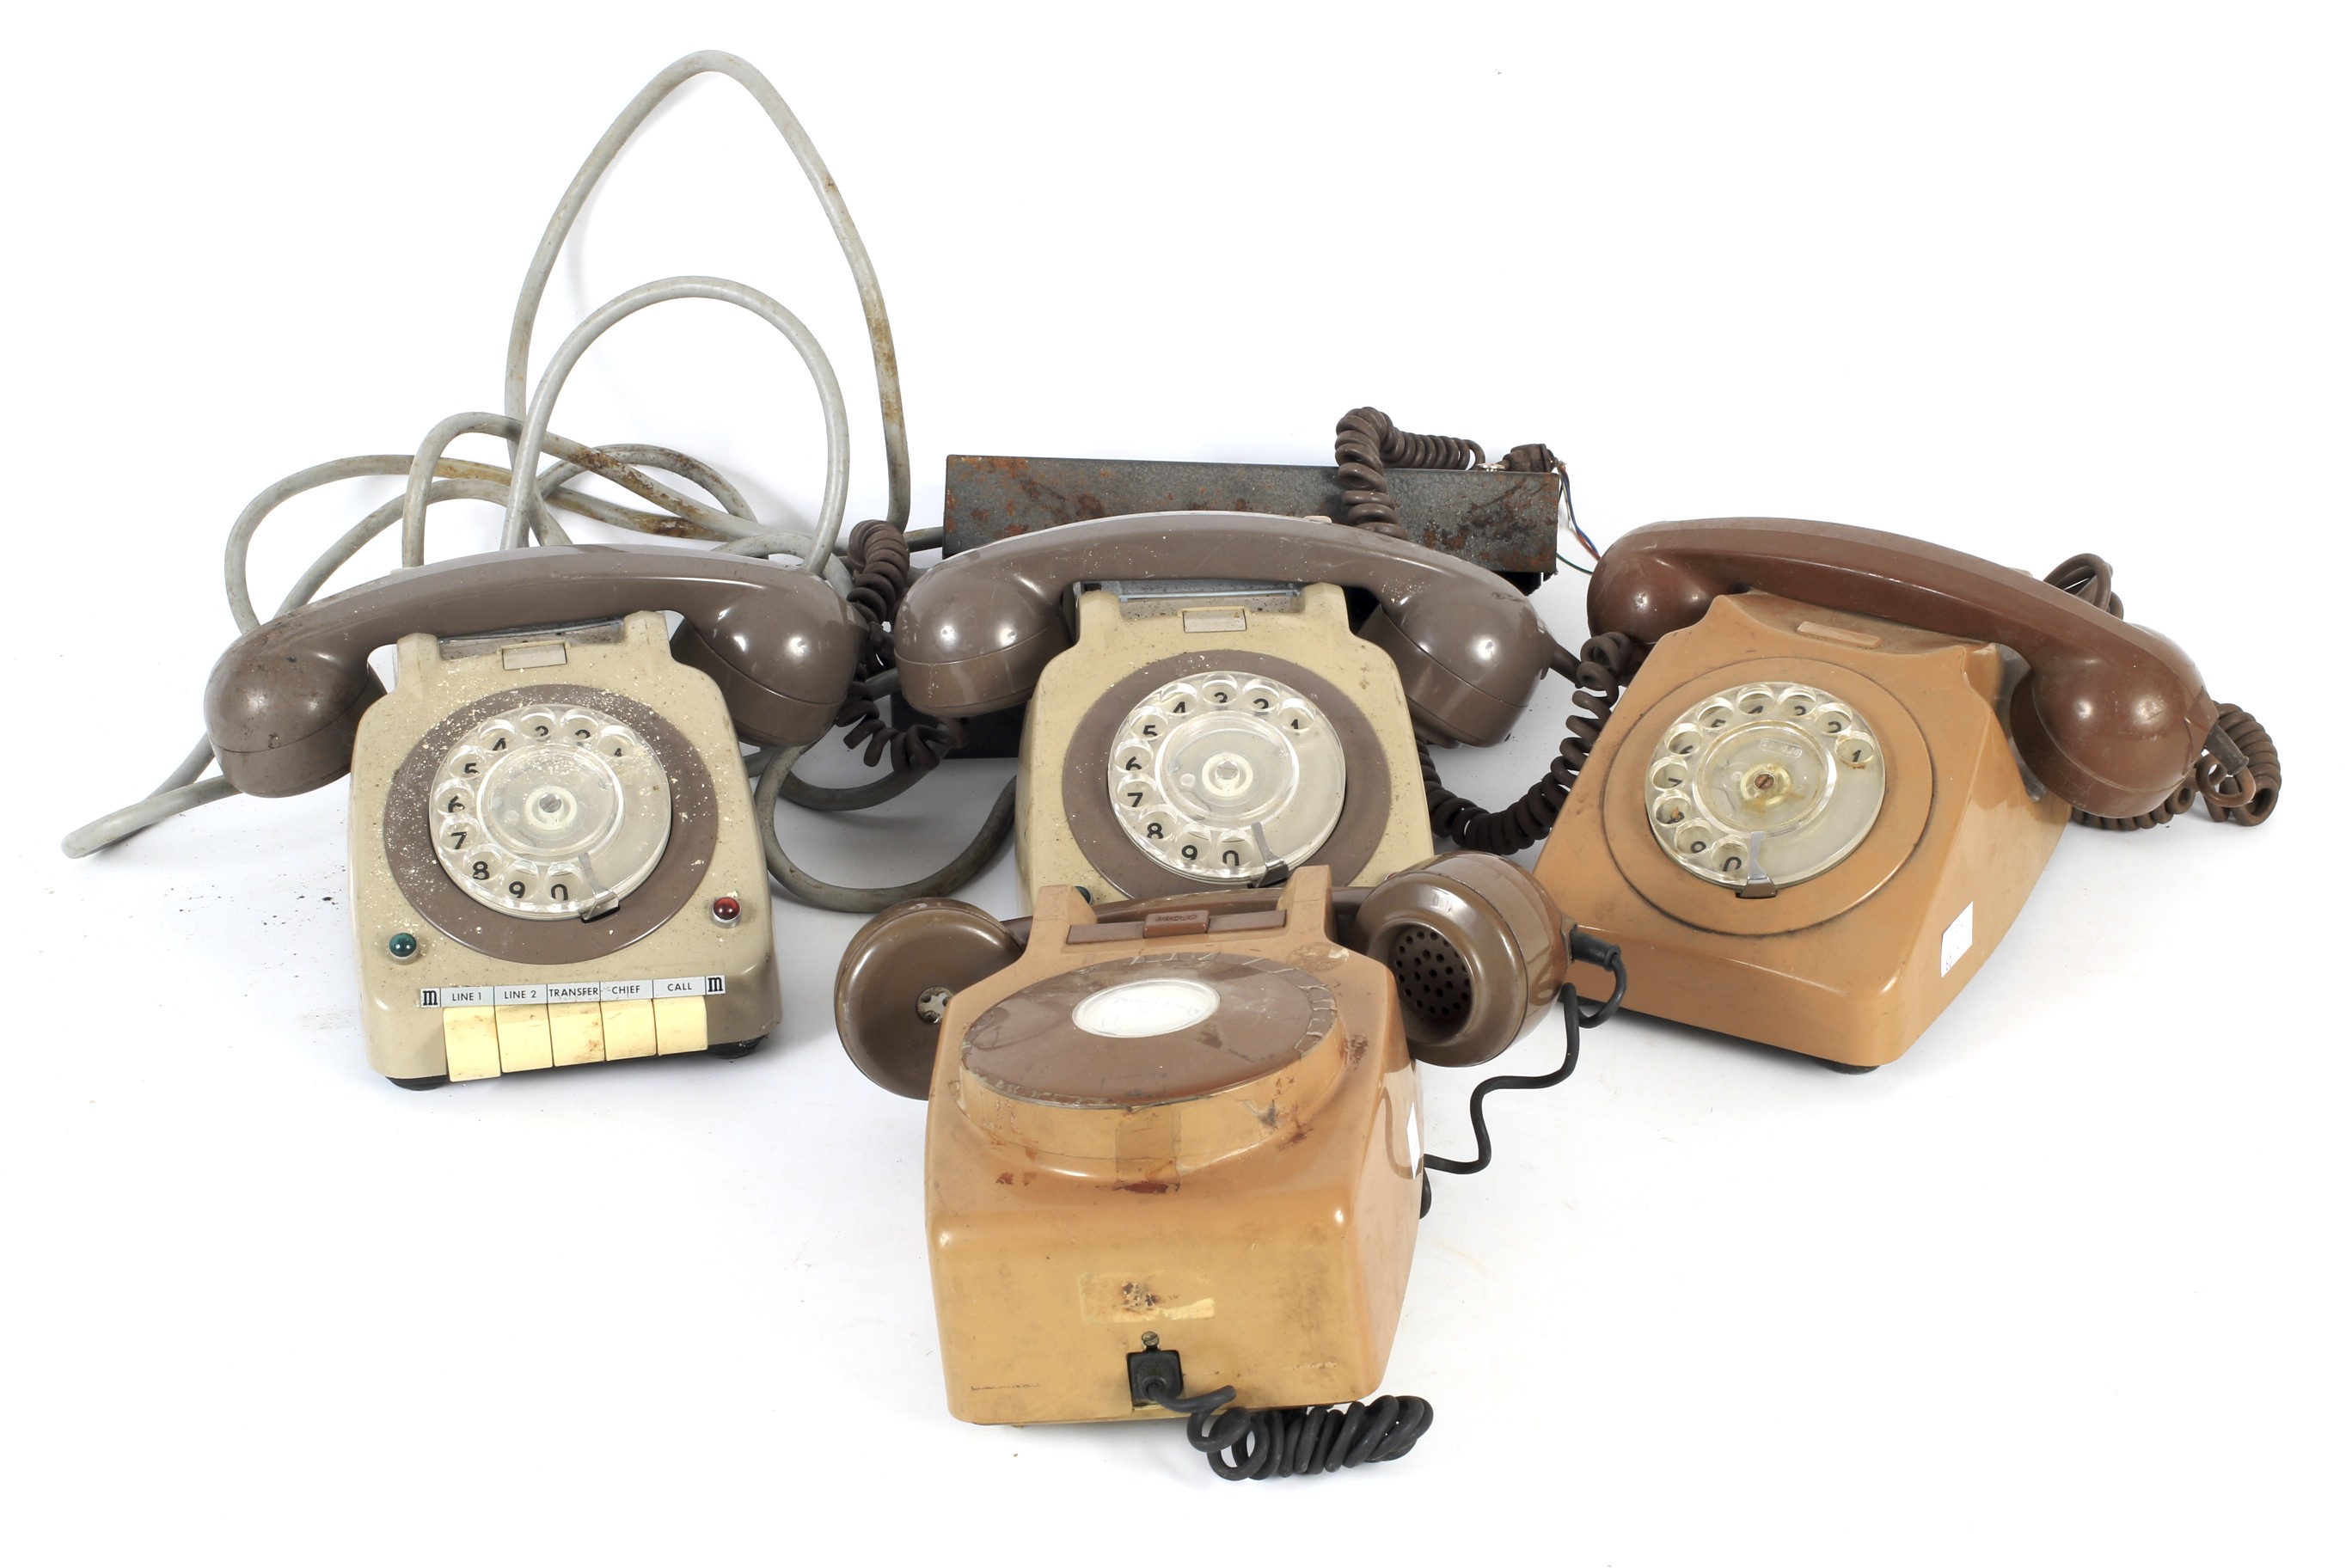 Three vintage mechanical rotary dial telephones.